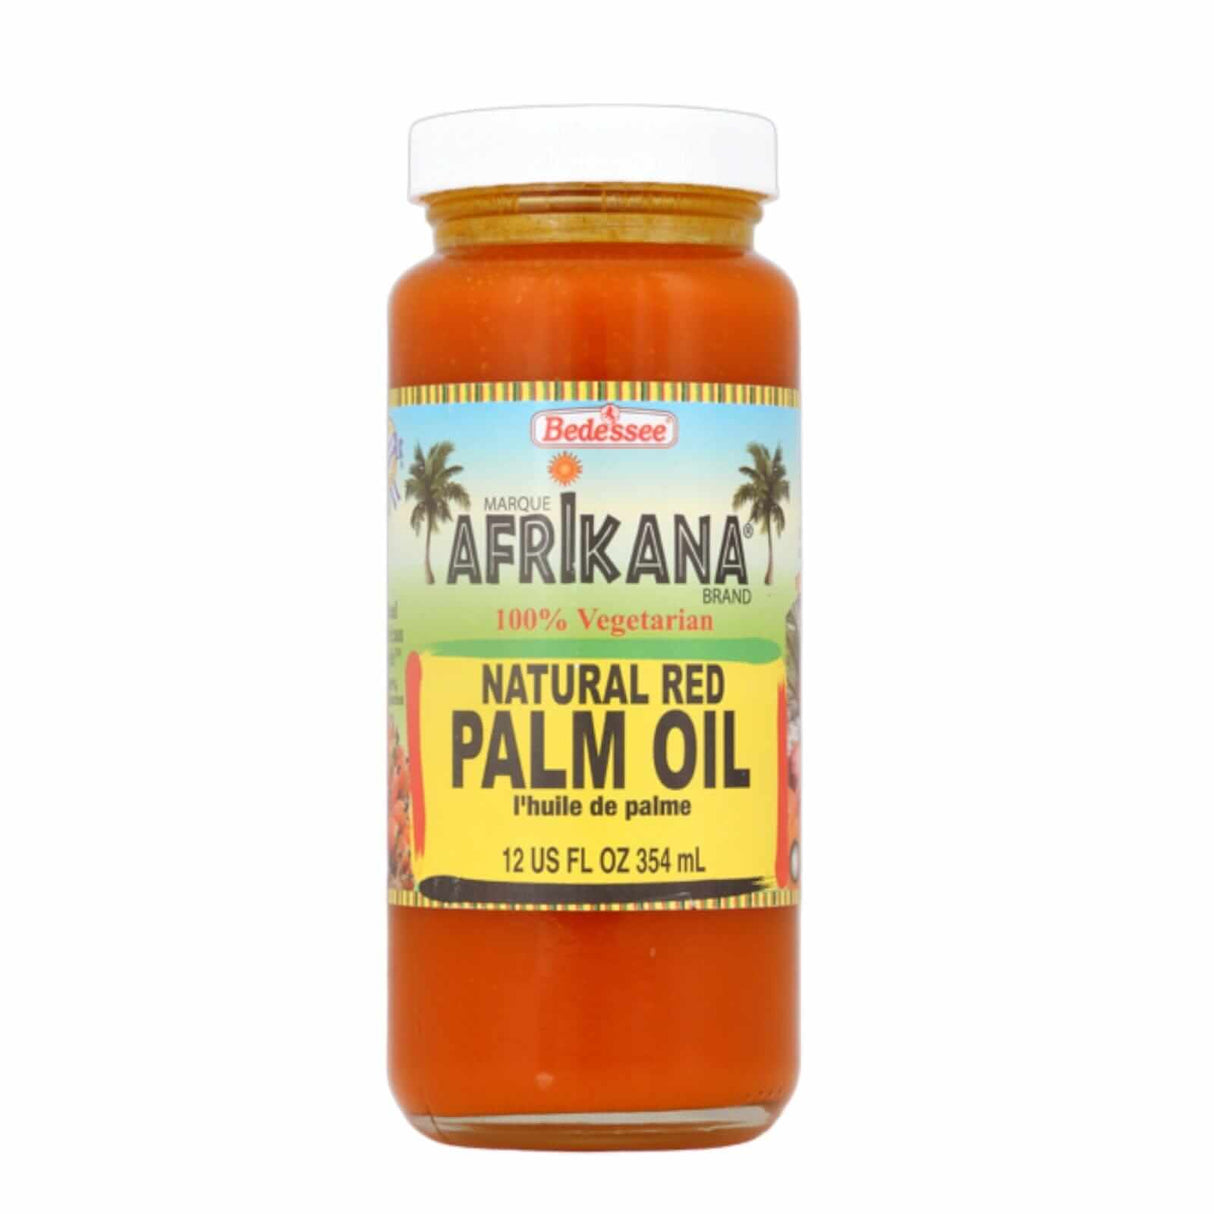 Afrikanal Brand Natural Red Palm Oil